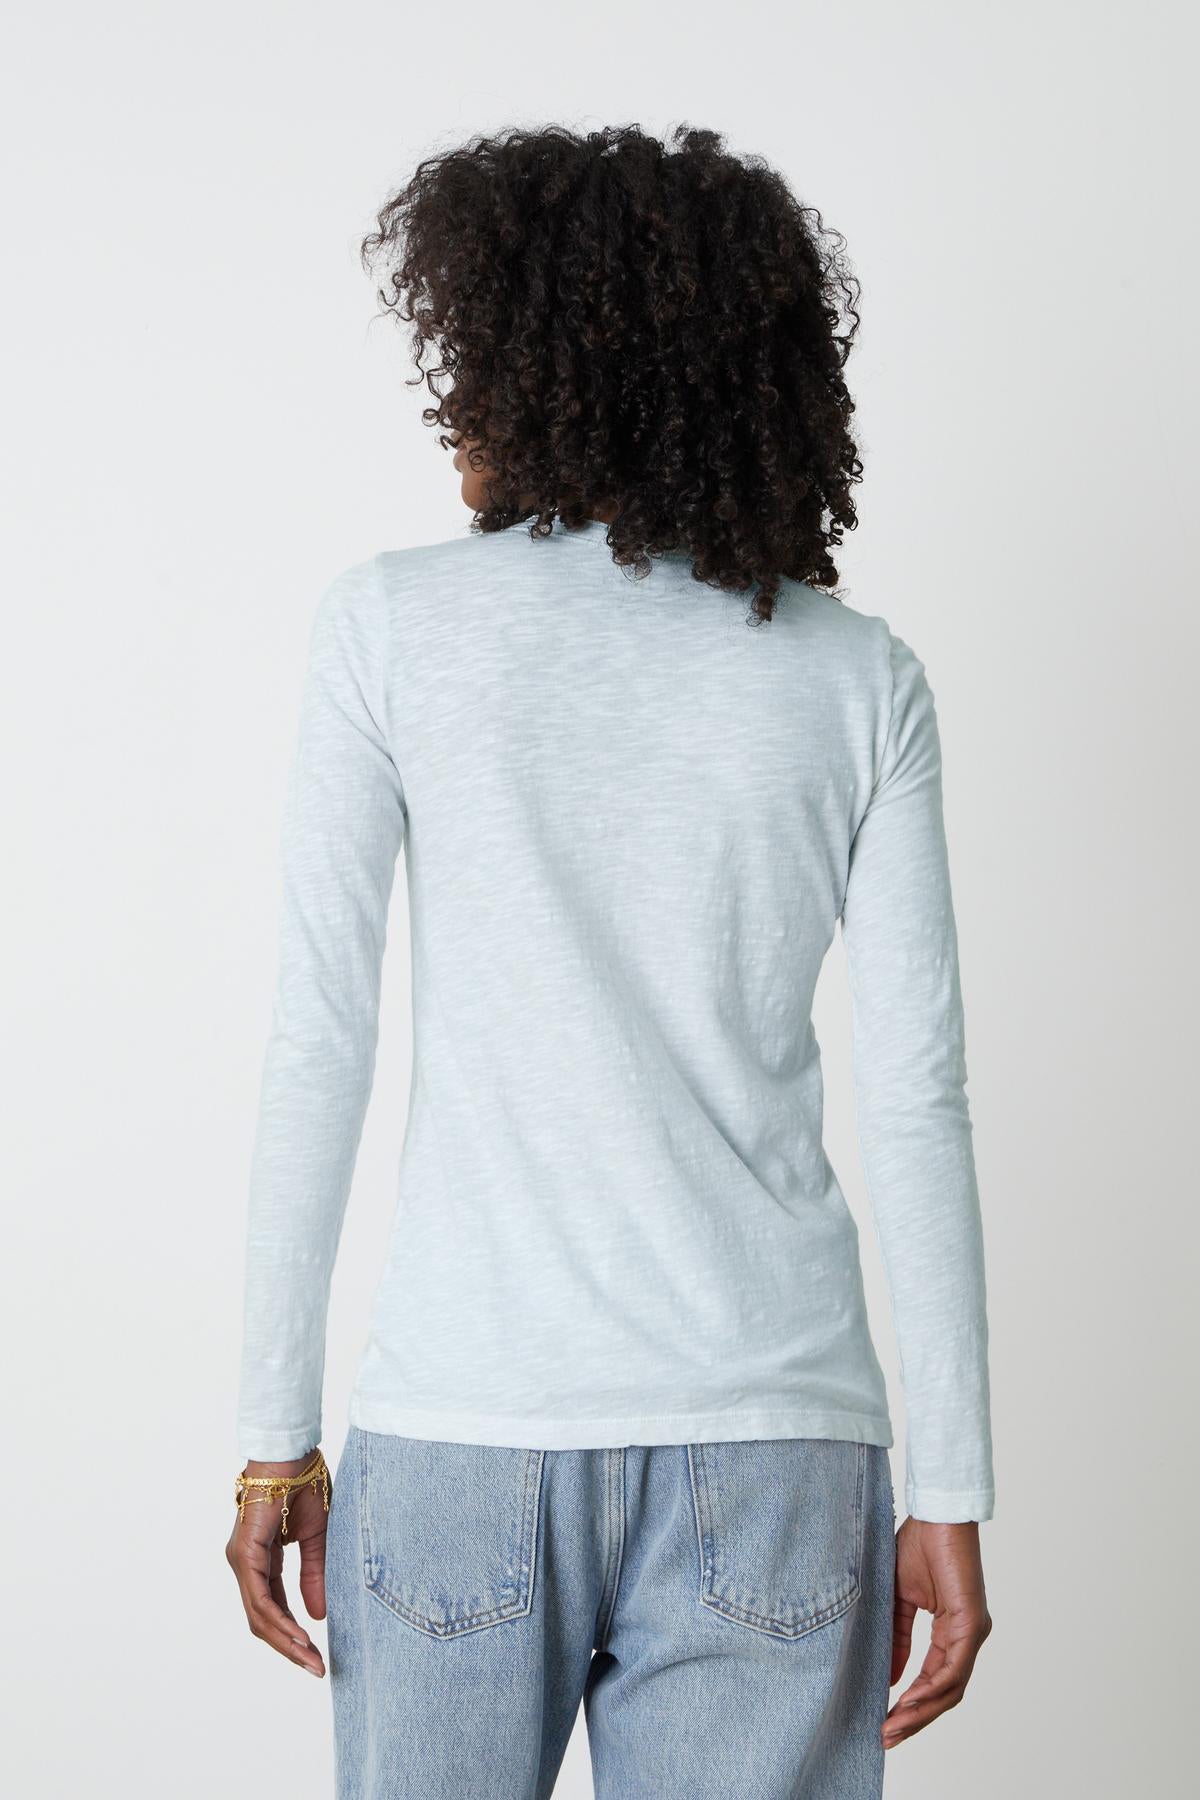 The back view of a woman wearing jeans and the Velvet by Graham & Spencer LIZZIE ORIGINAL SLUB LONG SLEEVE TEE.-35982858748097